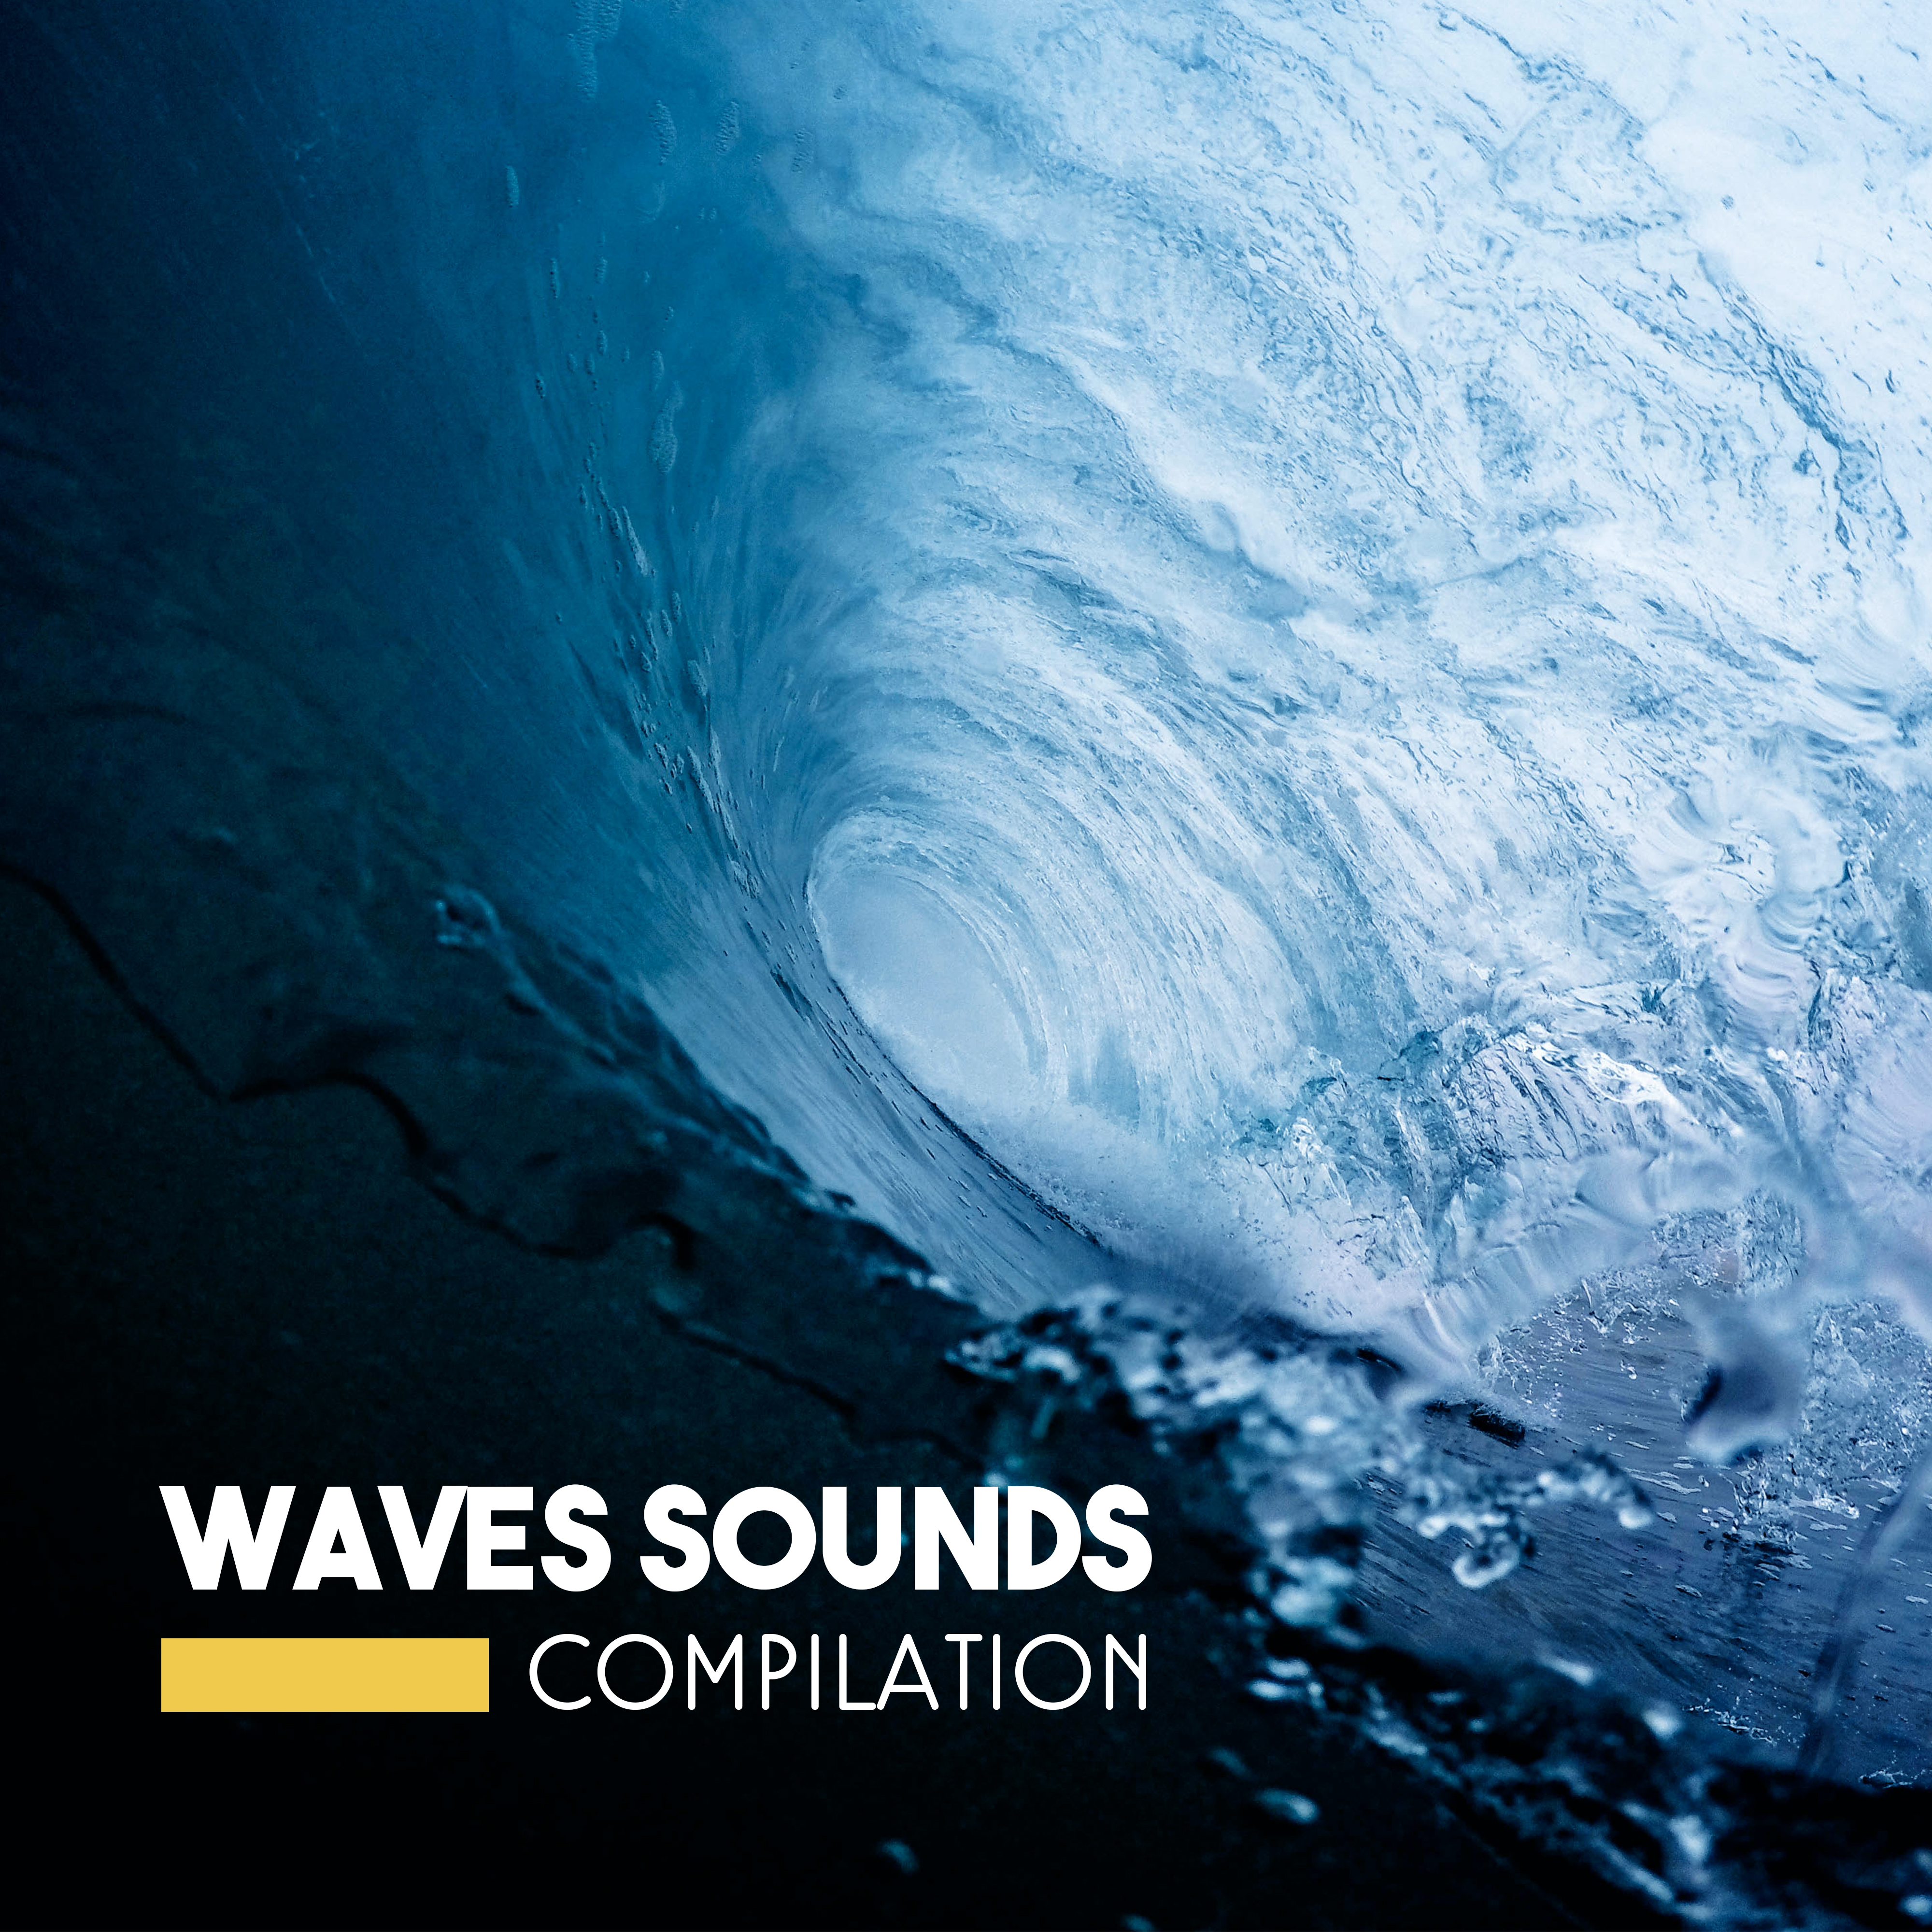 Waves Sounds Compilation – Relaxing Music 2017, Therapy Sounds of Nature, Zen, Bliss, Peaceful Melodies